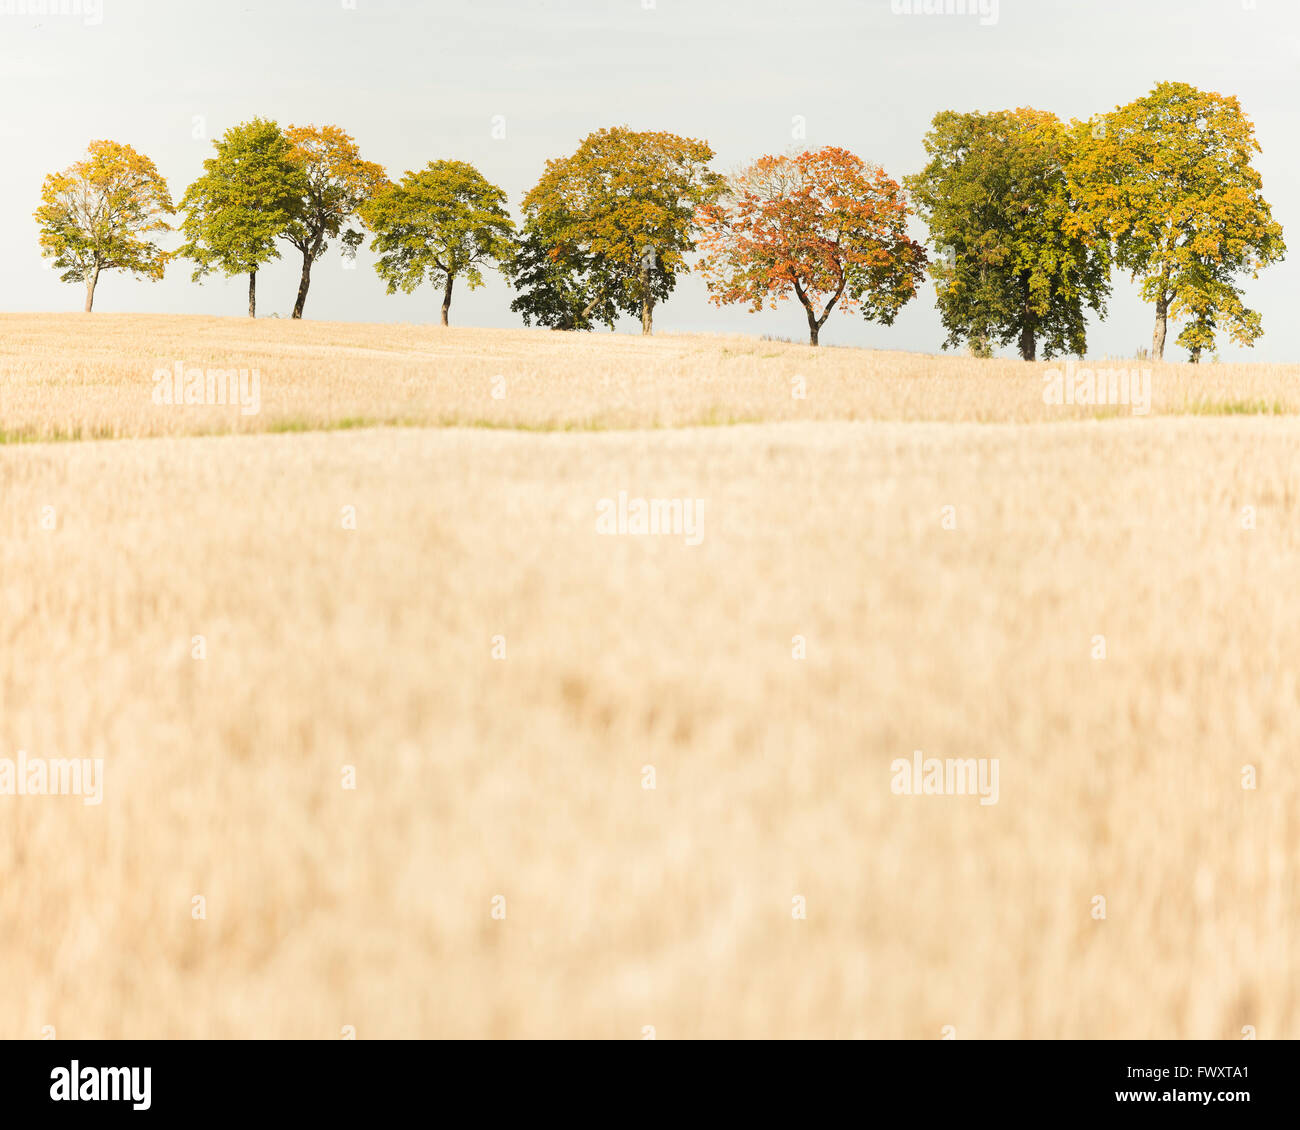 Sweden, Skane, Cereal plant and trees in background Stock Photo